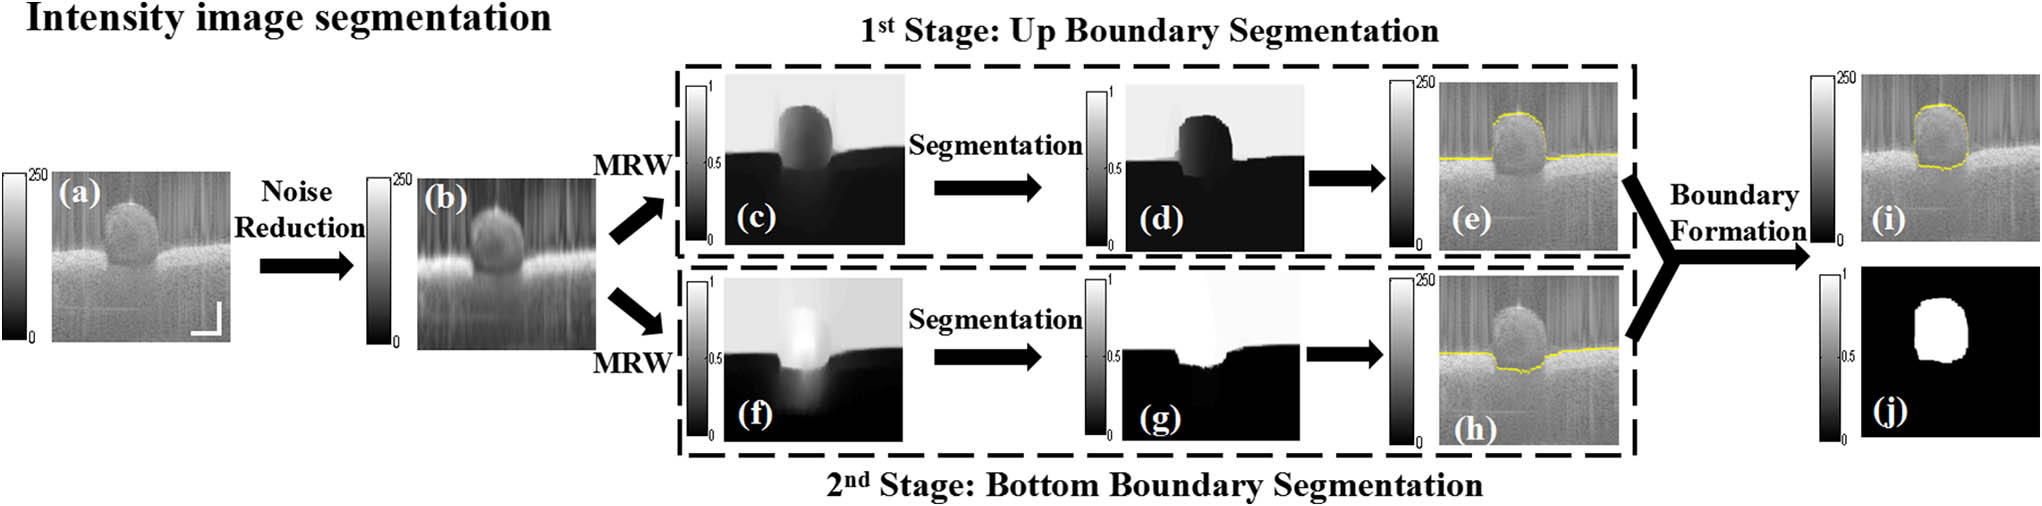 MRW algorithm segmentation procedure of intensity image. First stage shows the process of upper boundary segmentation. Second stage shows the process of bottom boundary segmentation. Then, they are combined to create an intact boundary mask (scale bar: 500 μm).